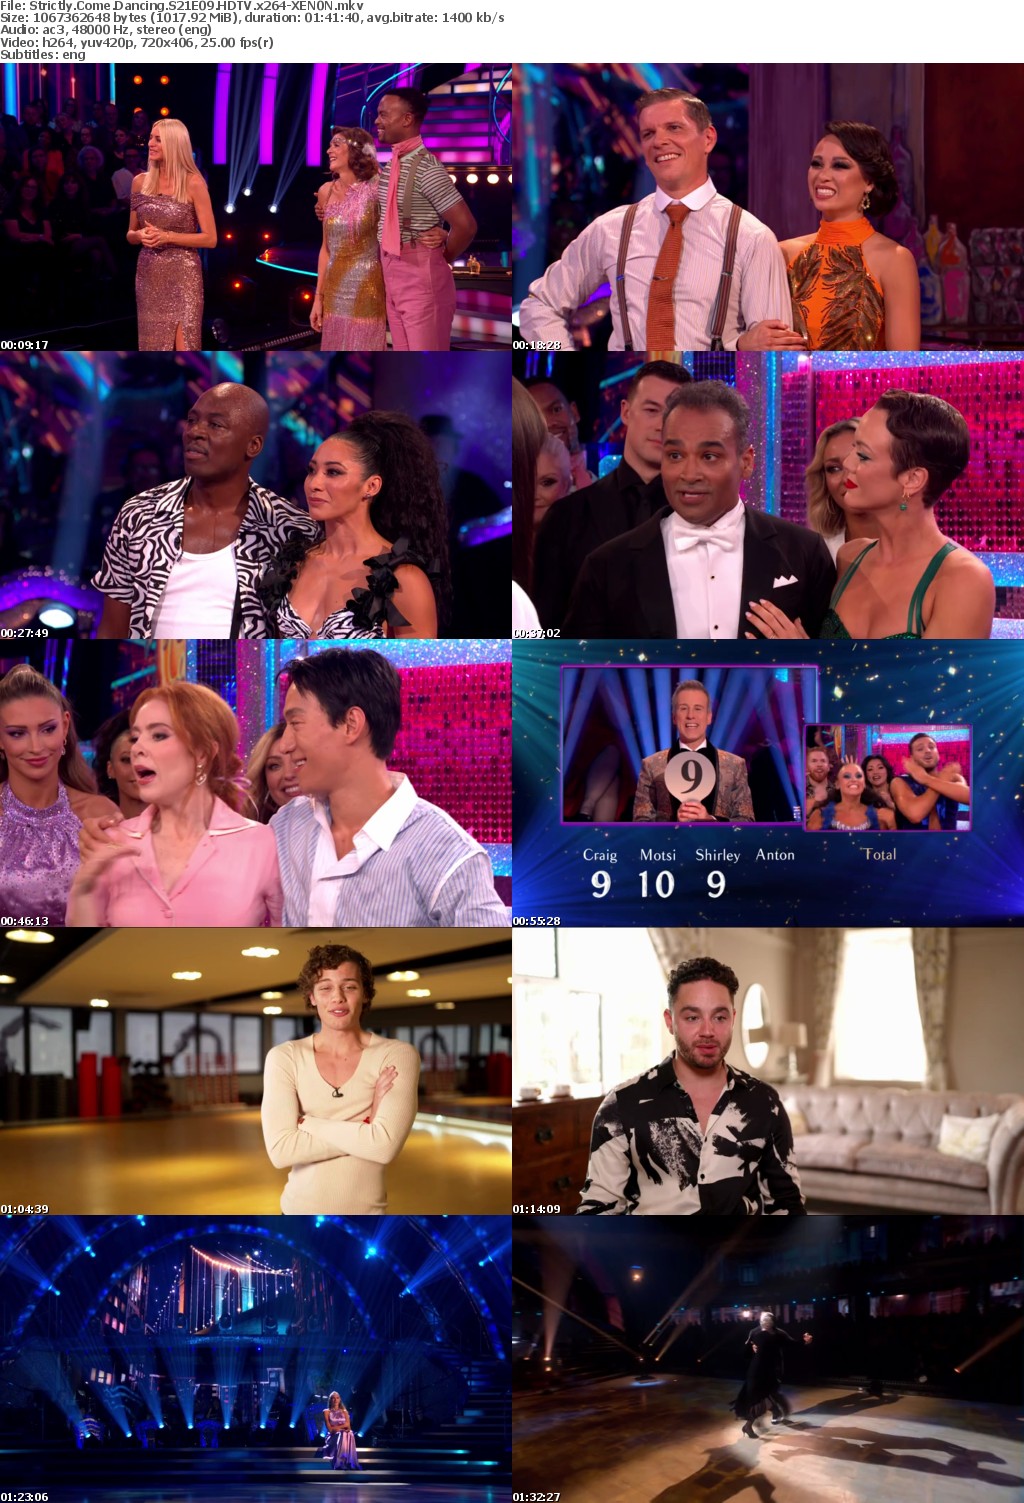 Strictly Come Dancing S21E09 HDTV x264-XEN0N Saturn5